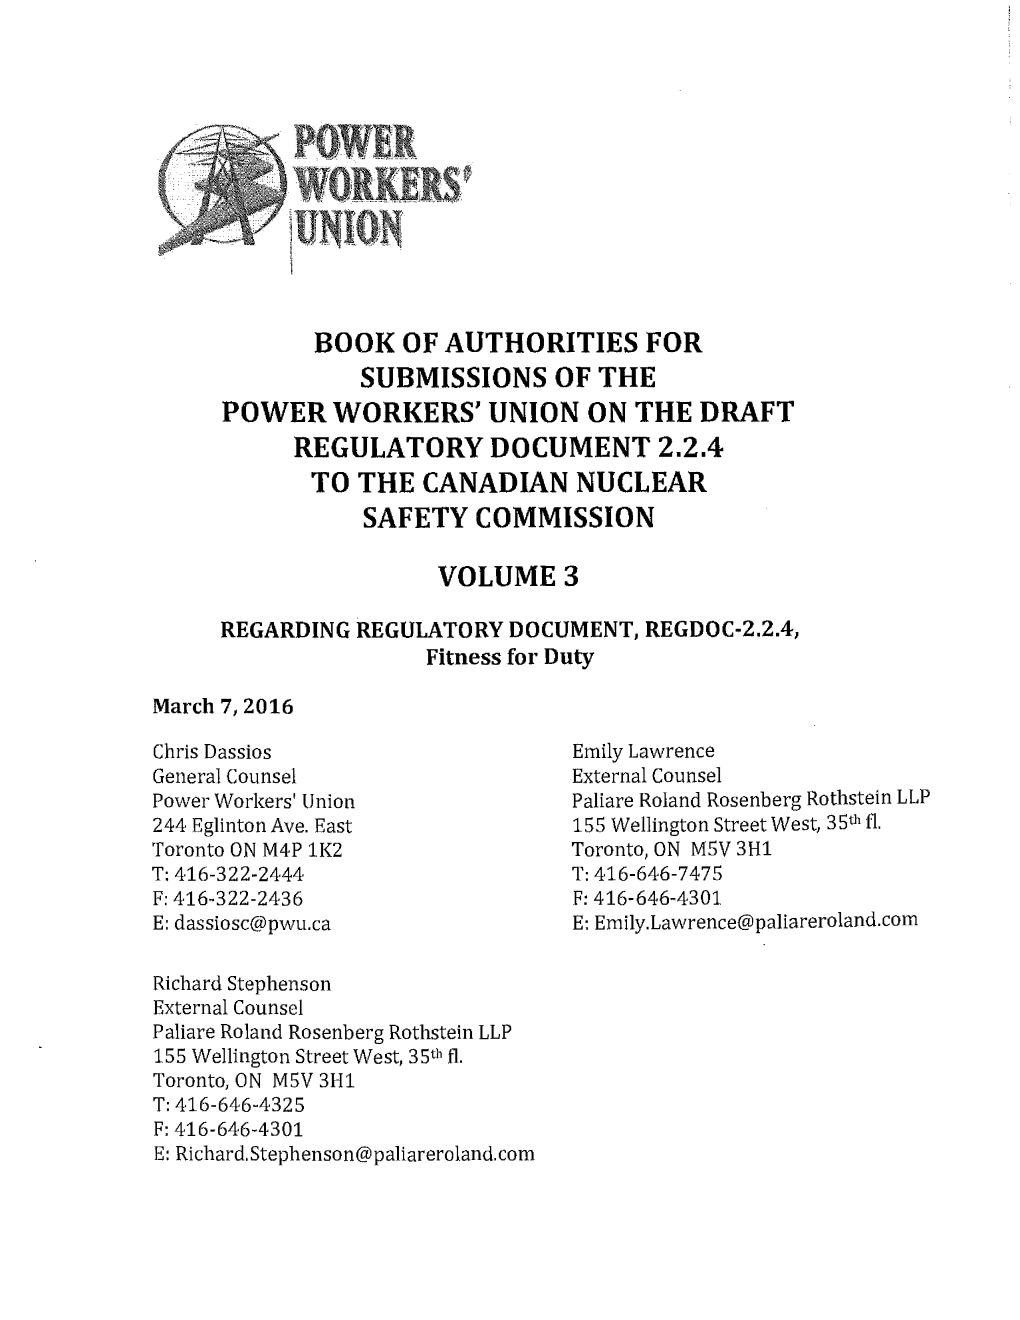 Book of Authorities for Submissions of the Power Workers'union on the Draft Regulatory Document 2.2.4 to the Canadian Nuclear Safety Commission